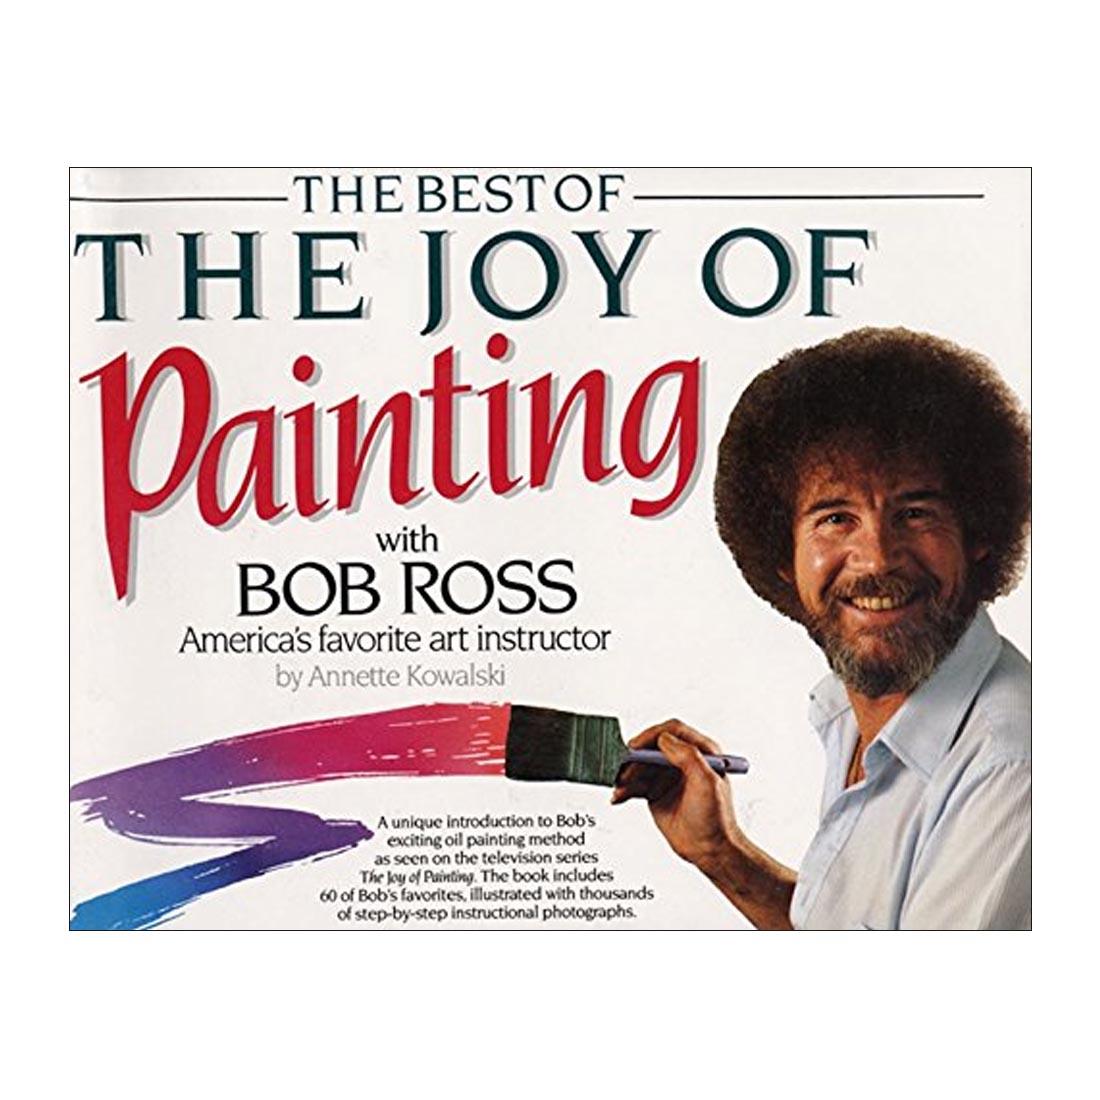 The Best Of The Joy Of Painting With Bob Ross